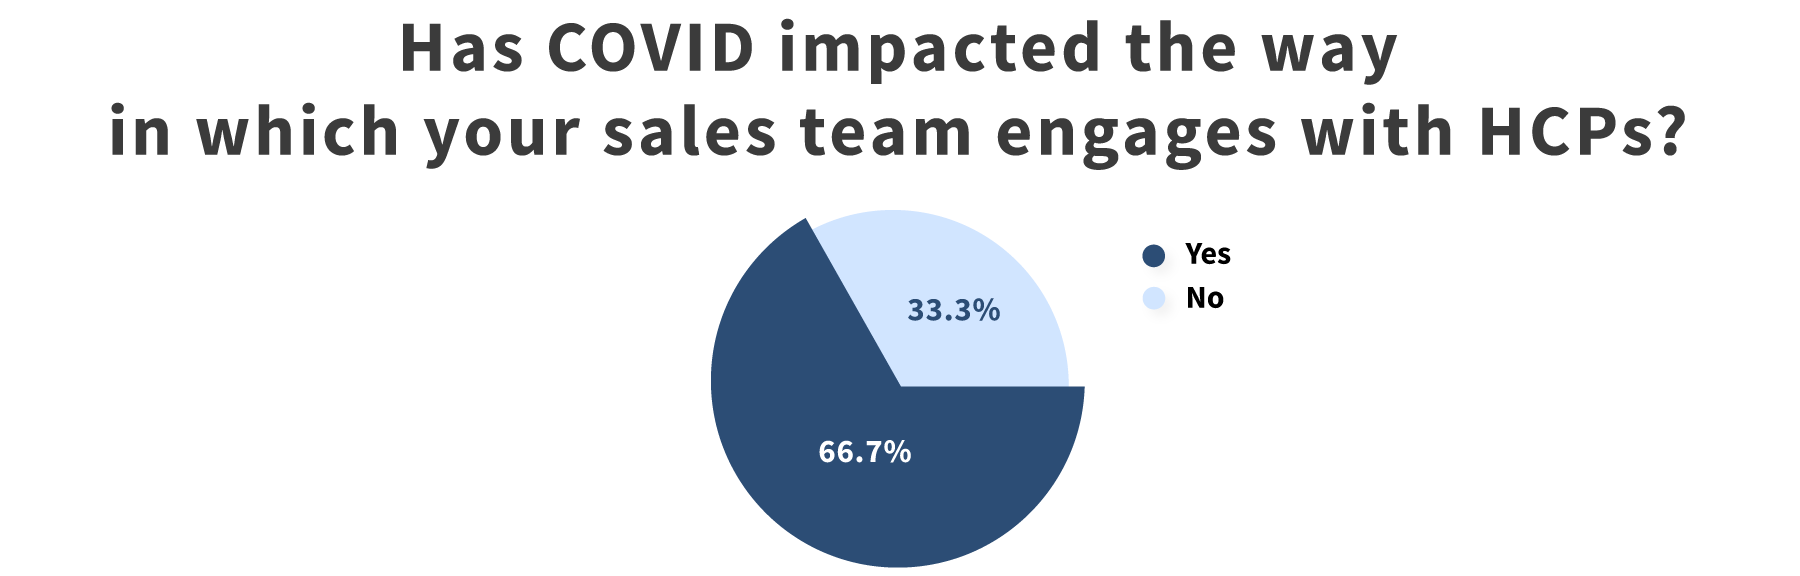 Has COVID actually impacted how pharma sales teams interact with HCPs?